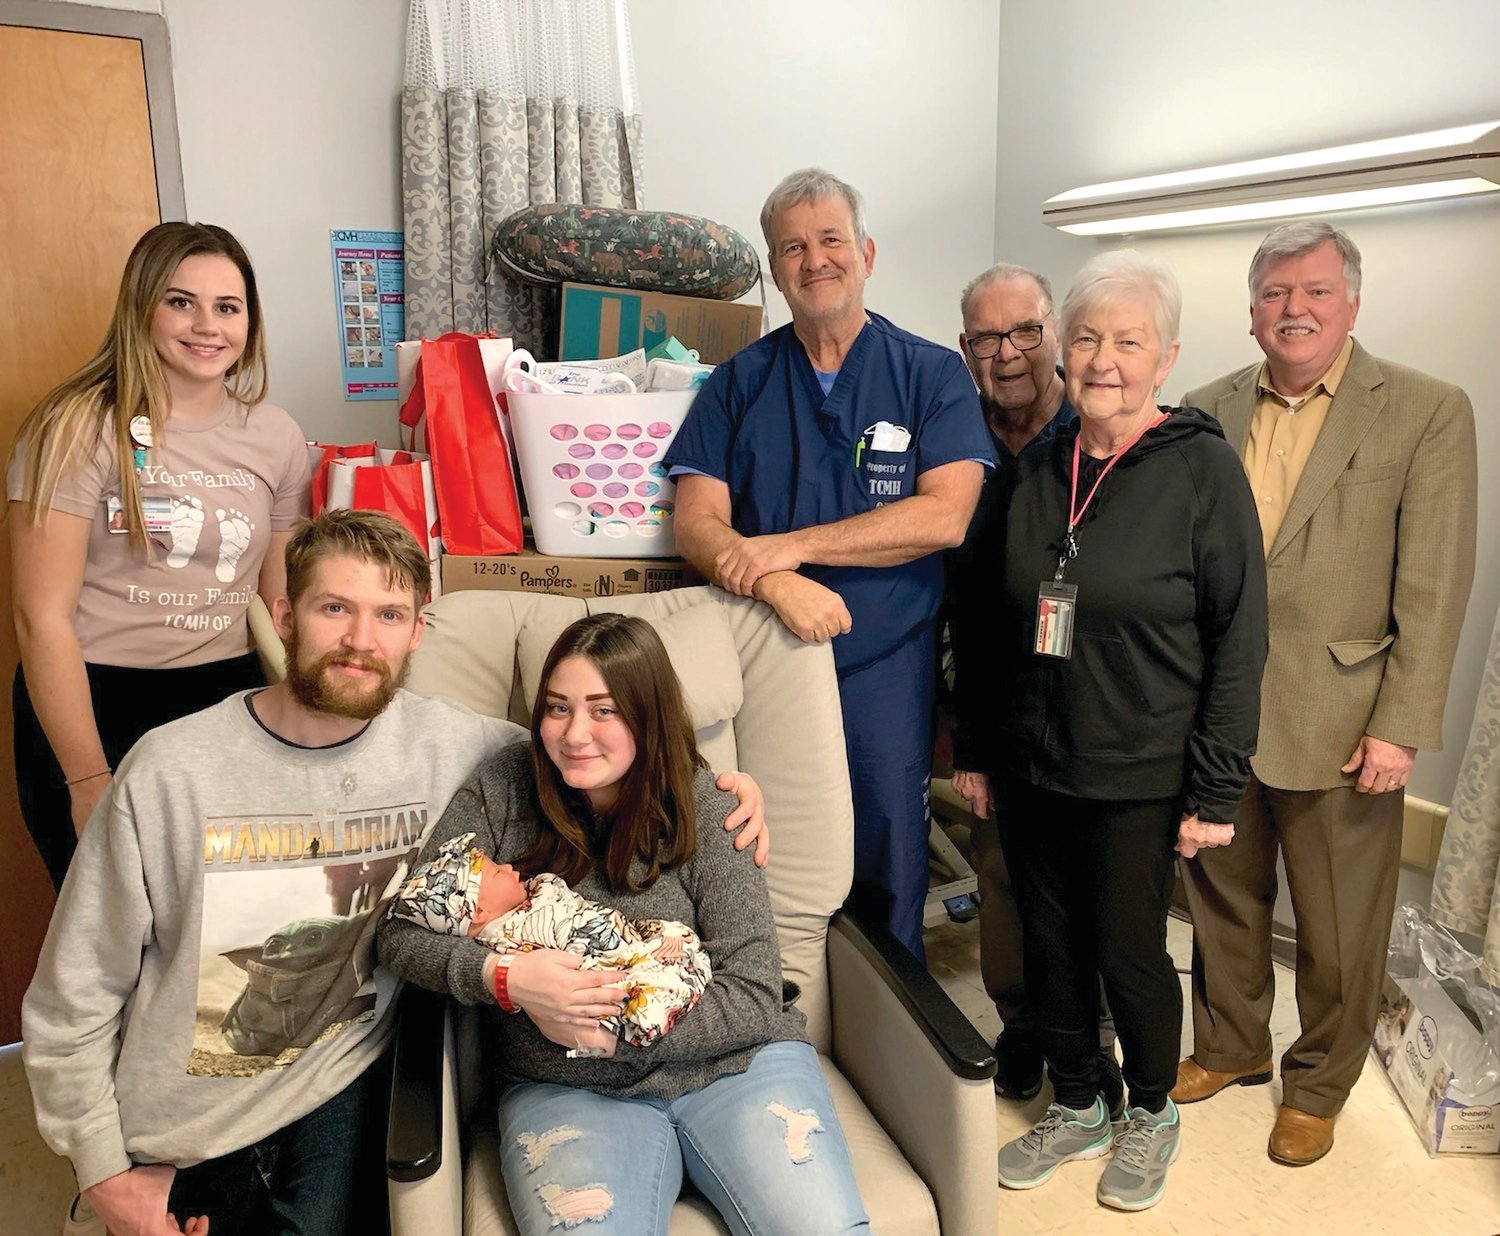 Mother and father, Haylee and William Myres, of Plato, welcomed Kabin, their first child, into the world on Jan. 3. Kabin was the first baby born in 2023 at Texas County Memorial Hospital (TCMH) in Houston.